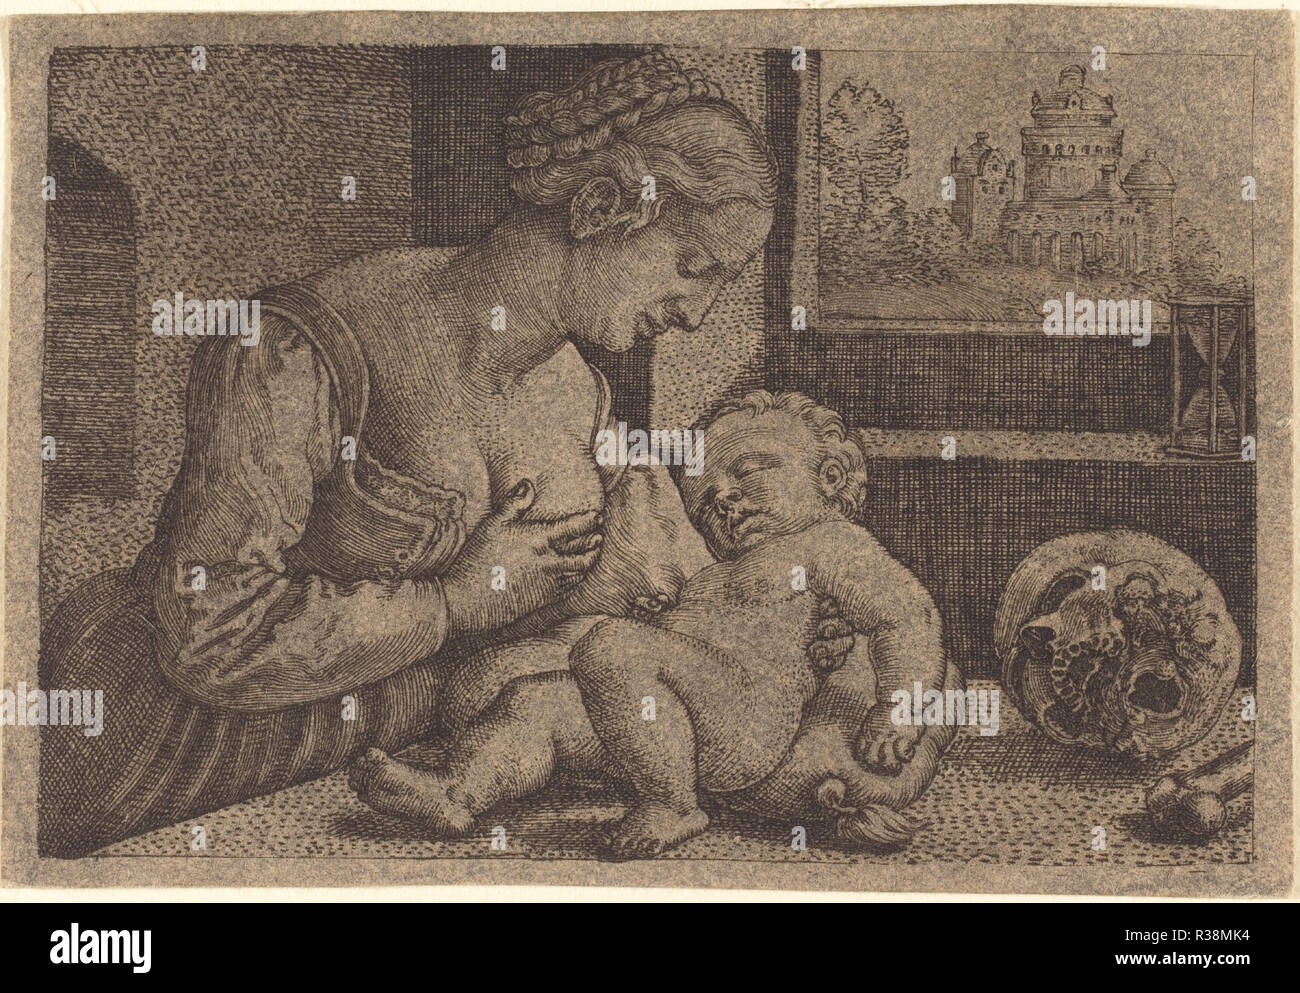 Madonna with Skull. Medium: engraving on paper tinted with gray wash. Museum: National Gallery of Art, Washington DC. Author: Barthel Beham. Stock Photo